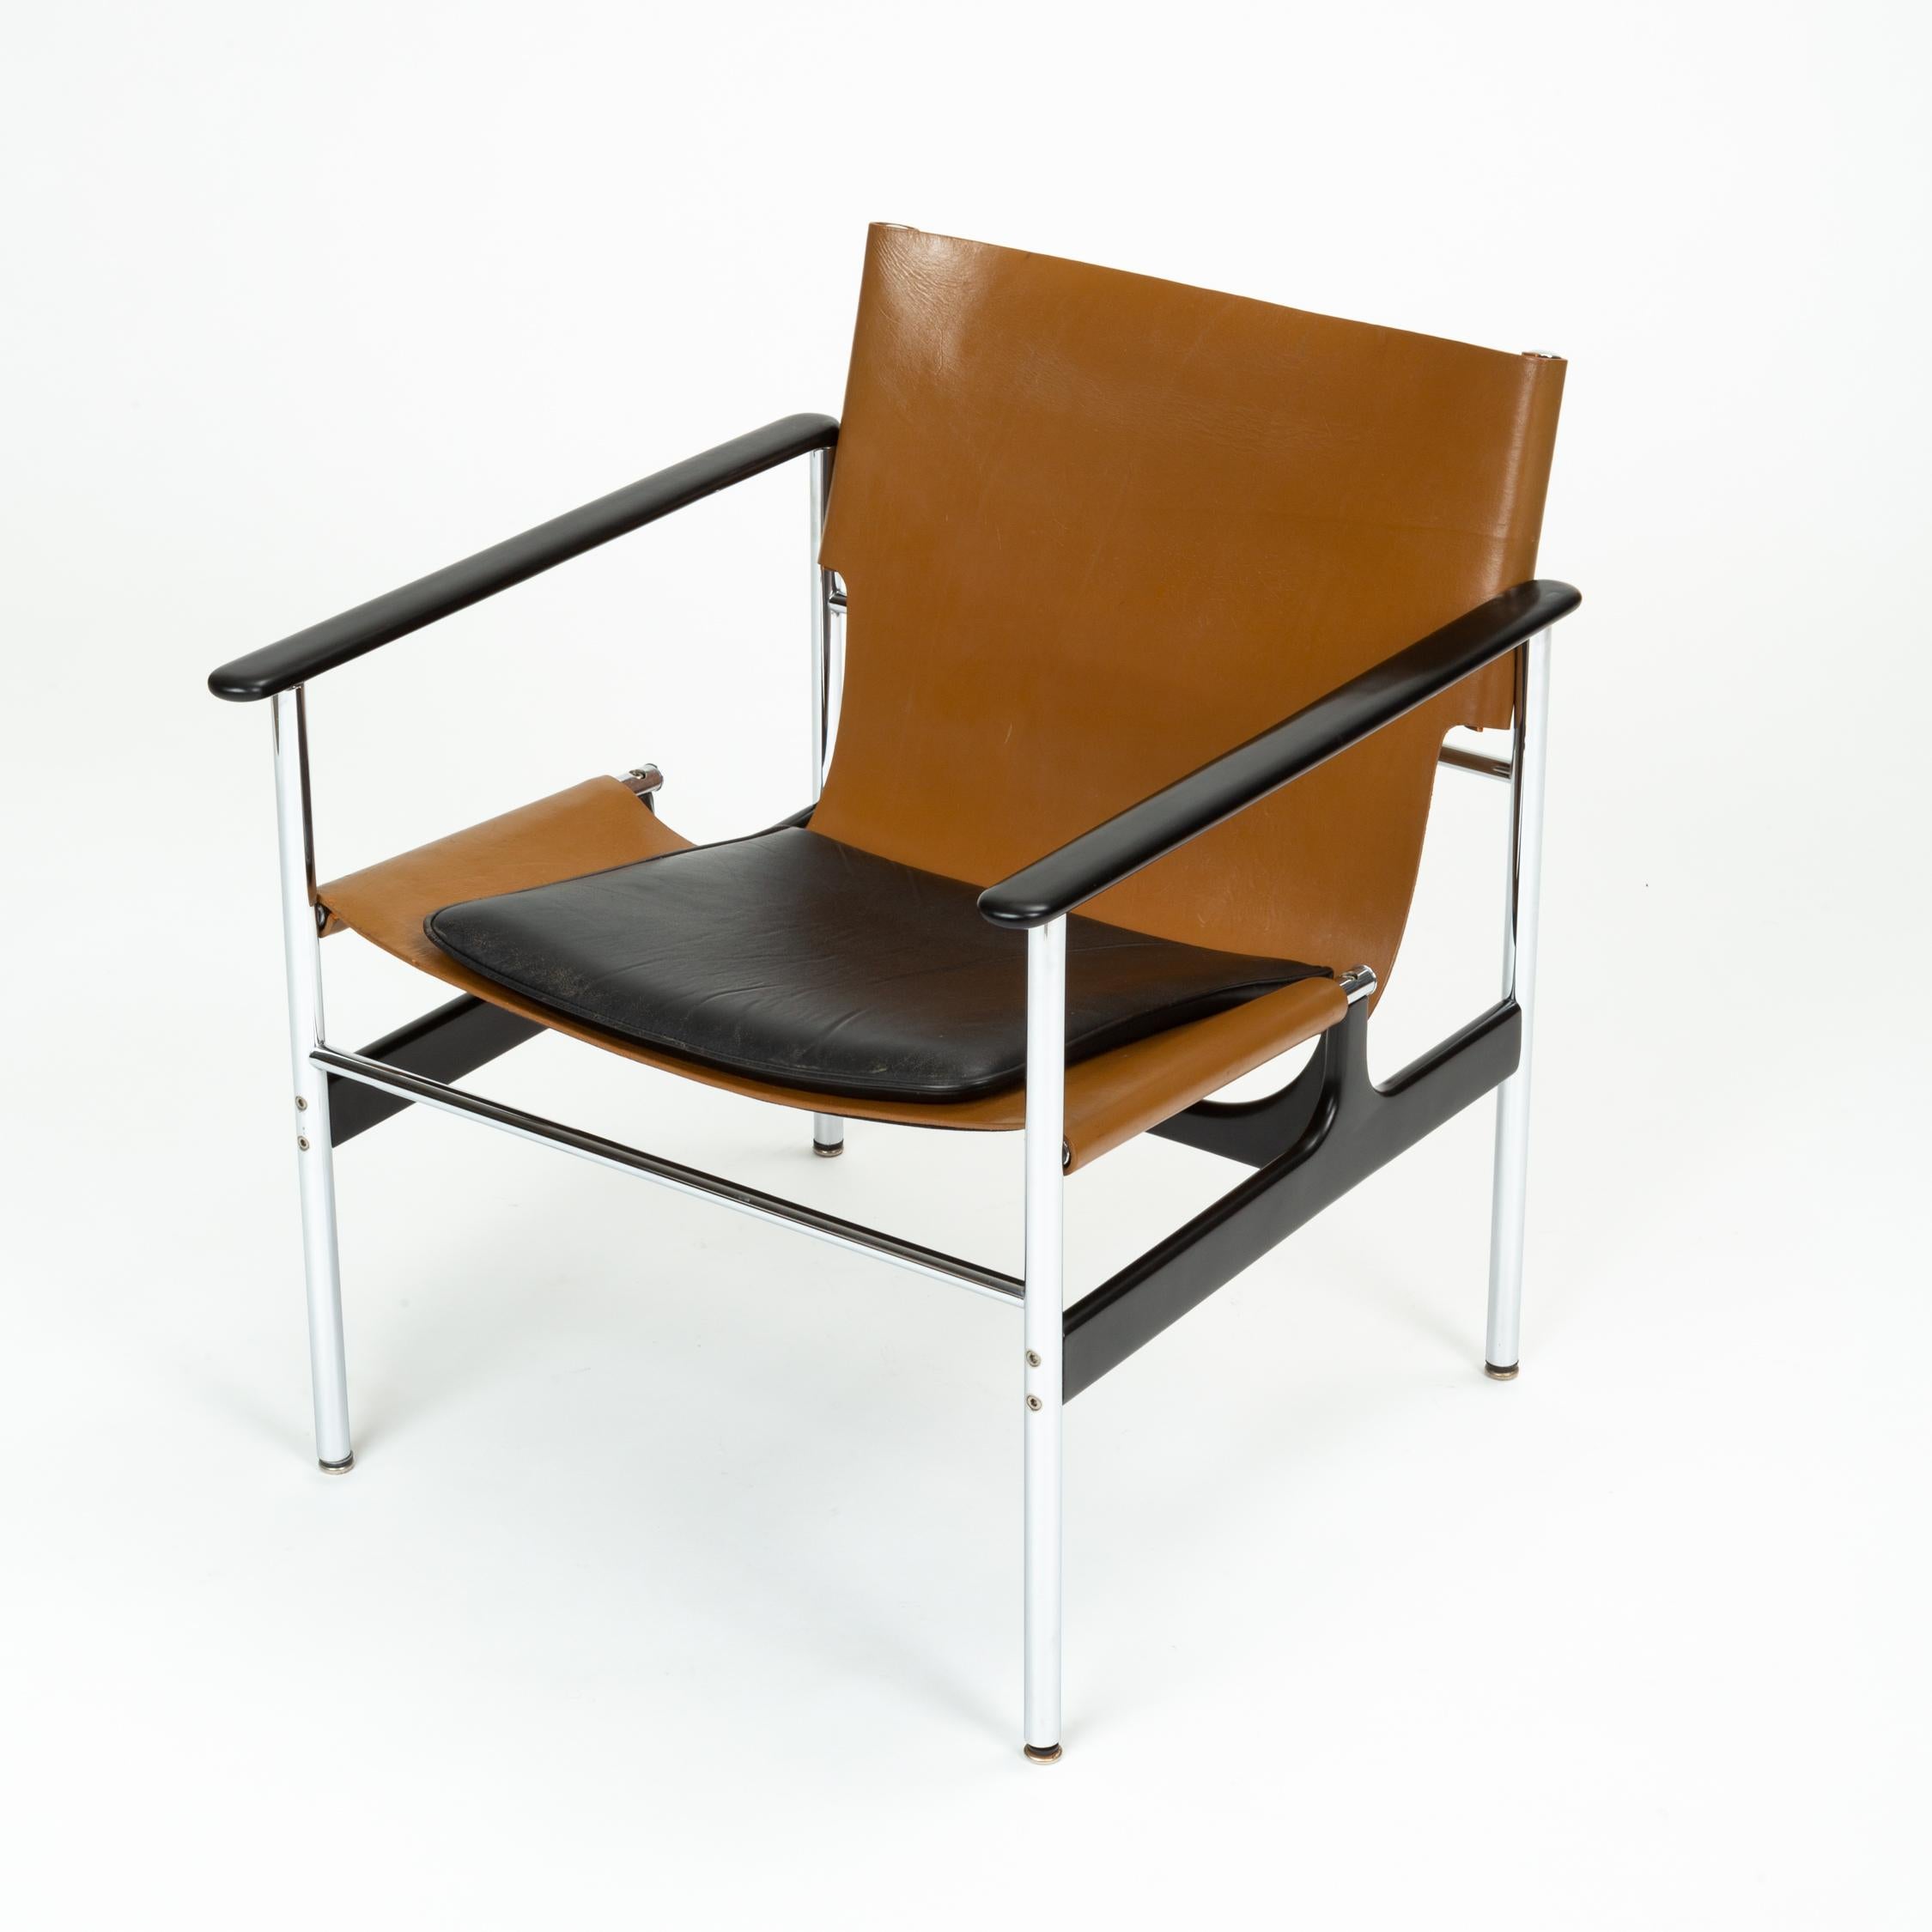 A sleek model 657 sling chairs designed in 1960 by Charles Pollock for Knoll. The chair was originally produced from 1964-1979 and features a steel structure with cast aluminum stretchers and rounded armrests. A sling of thick tan leather is bolted